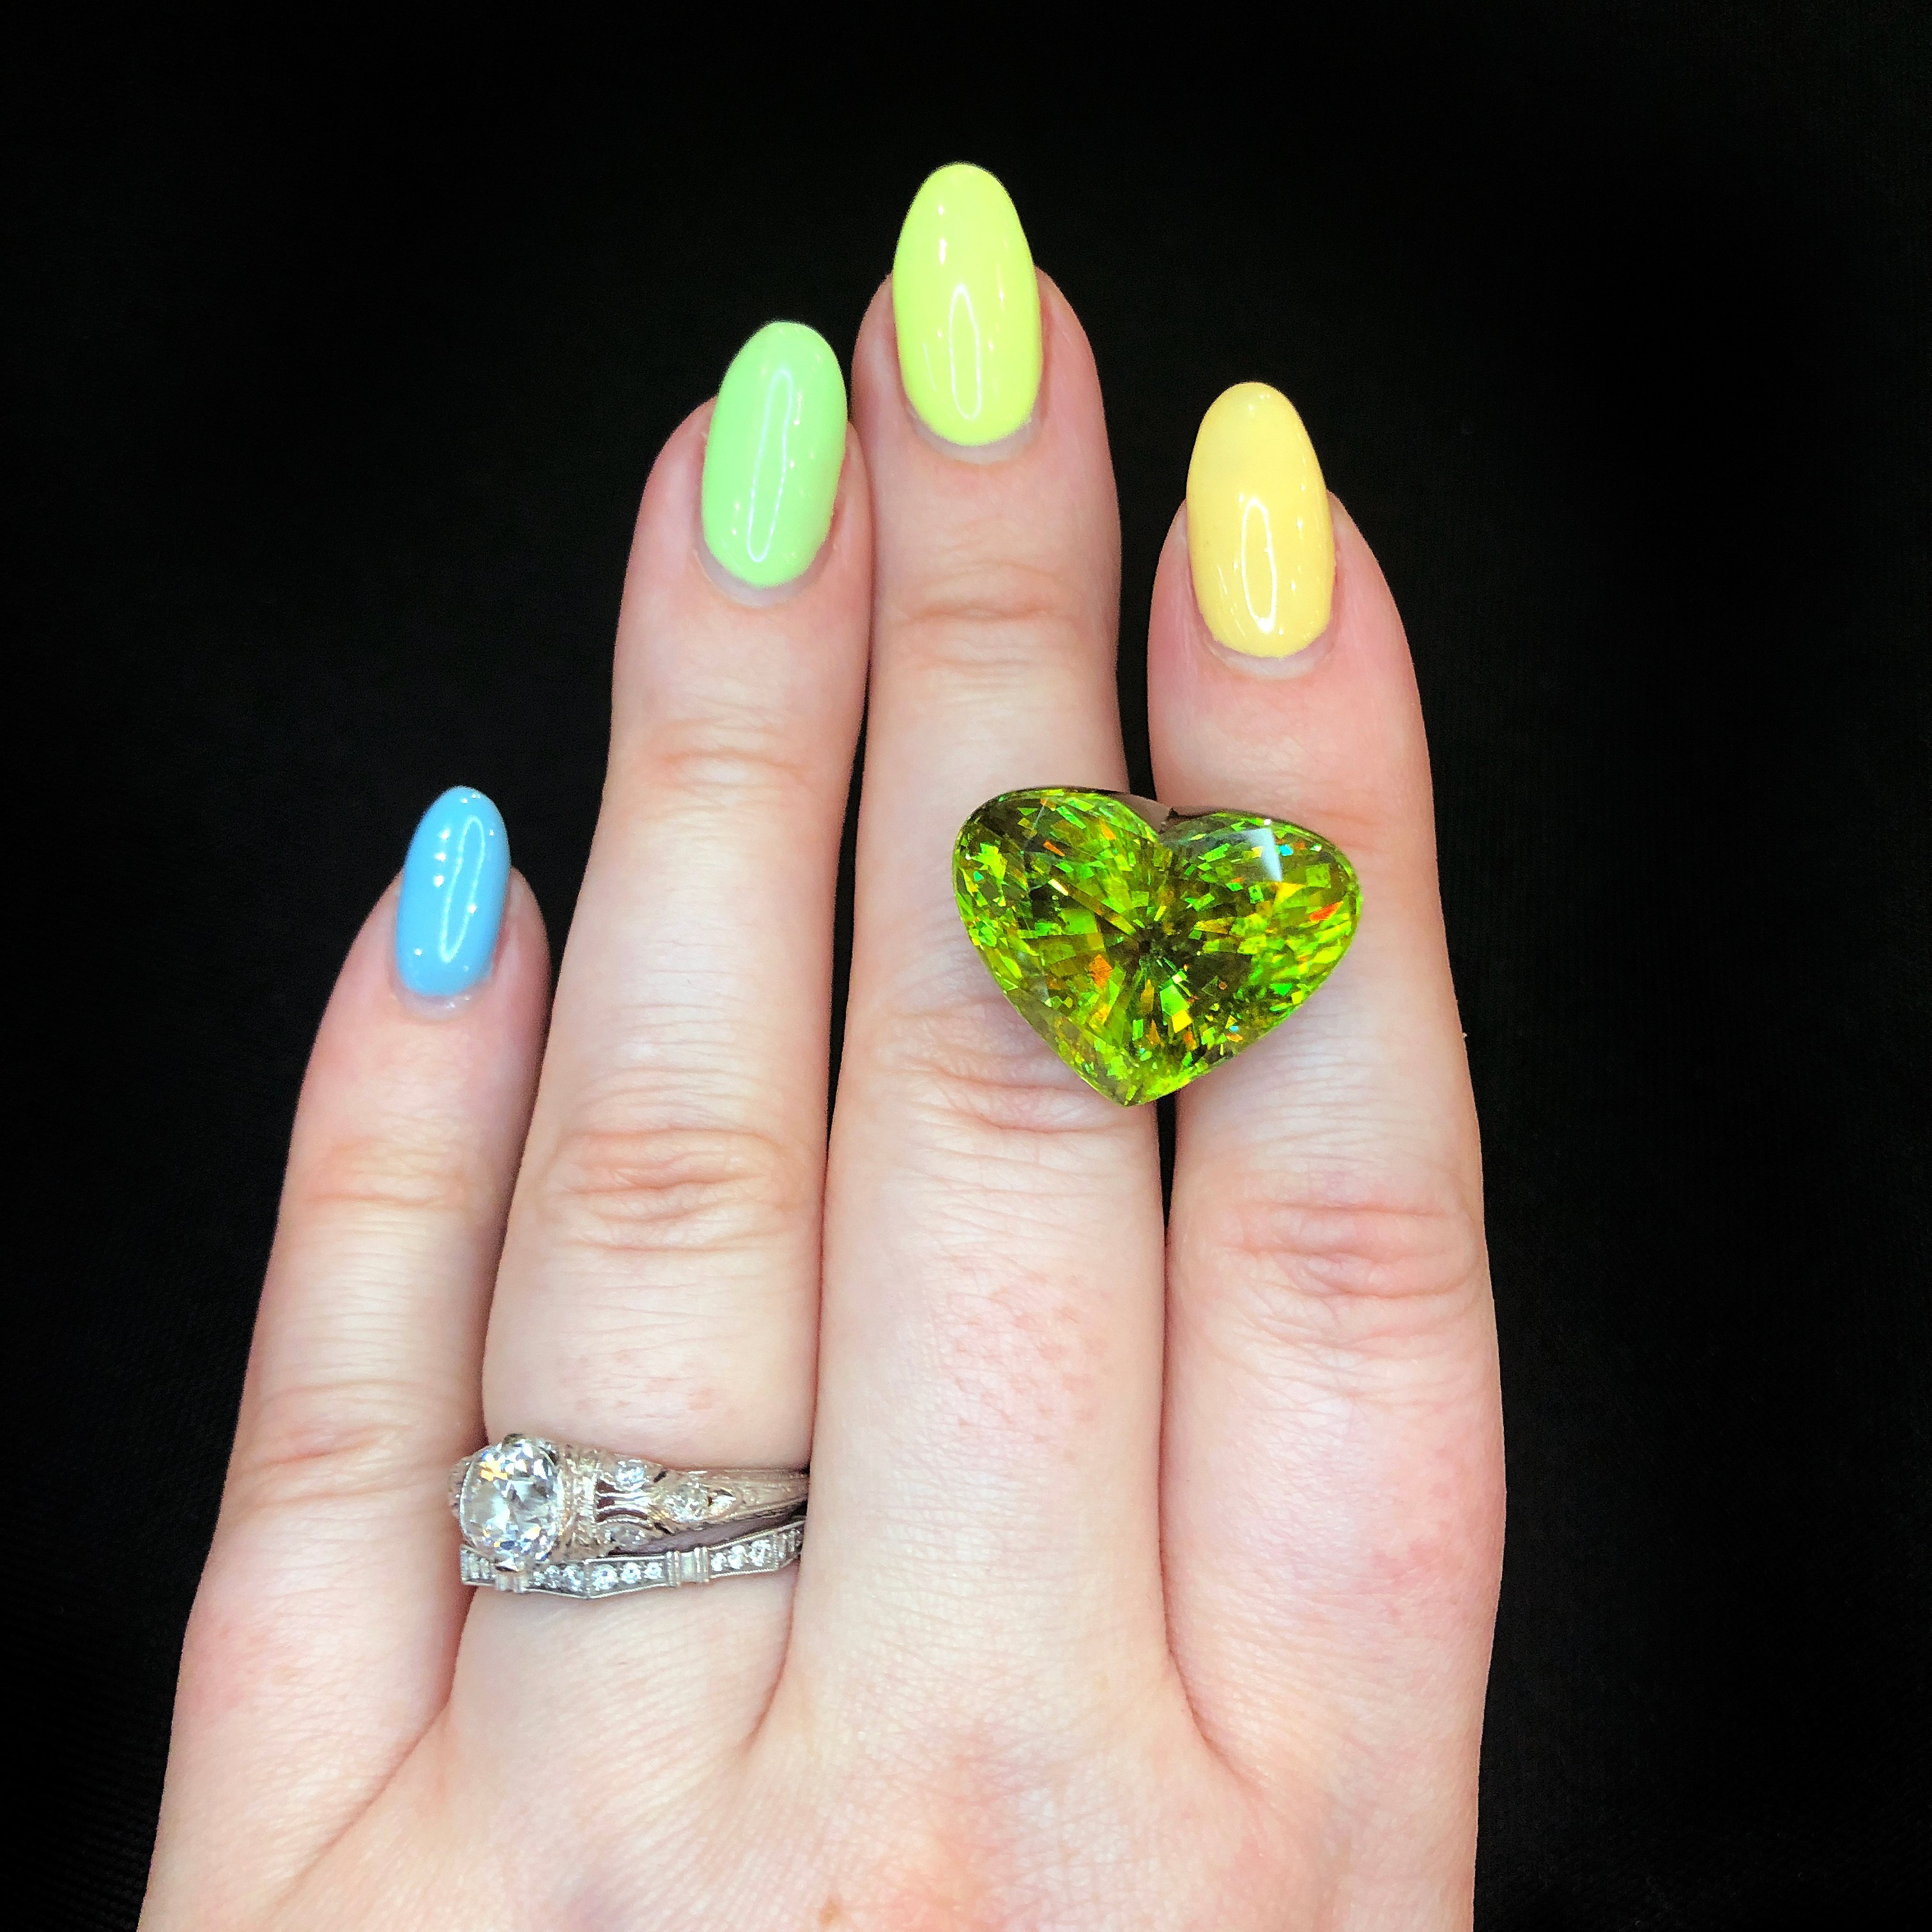 Sphene is a stunning green gemstone with orange flecks. This heart-shaped beauty is from Michael Couch.